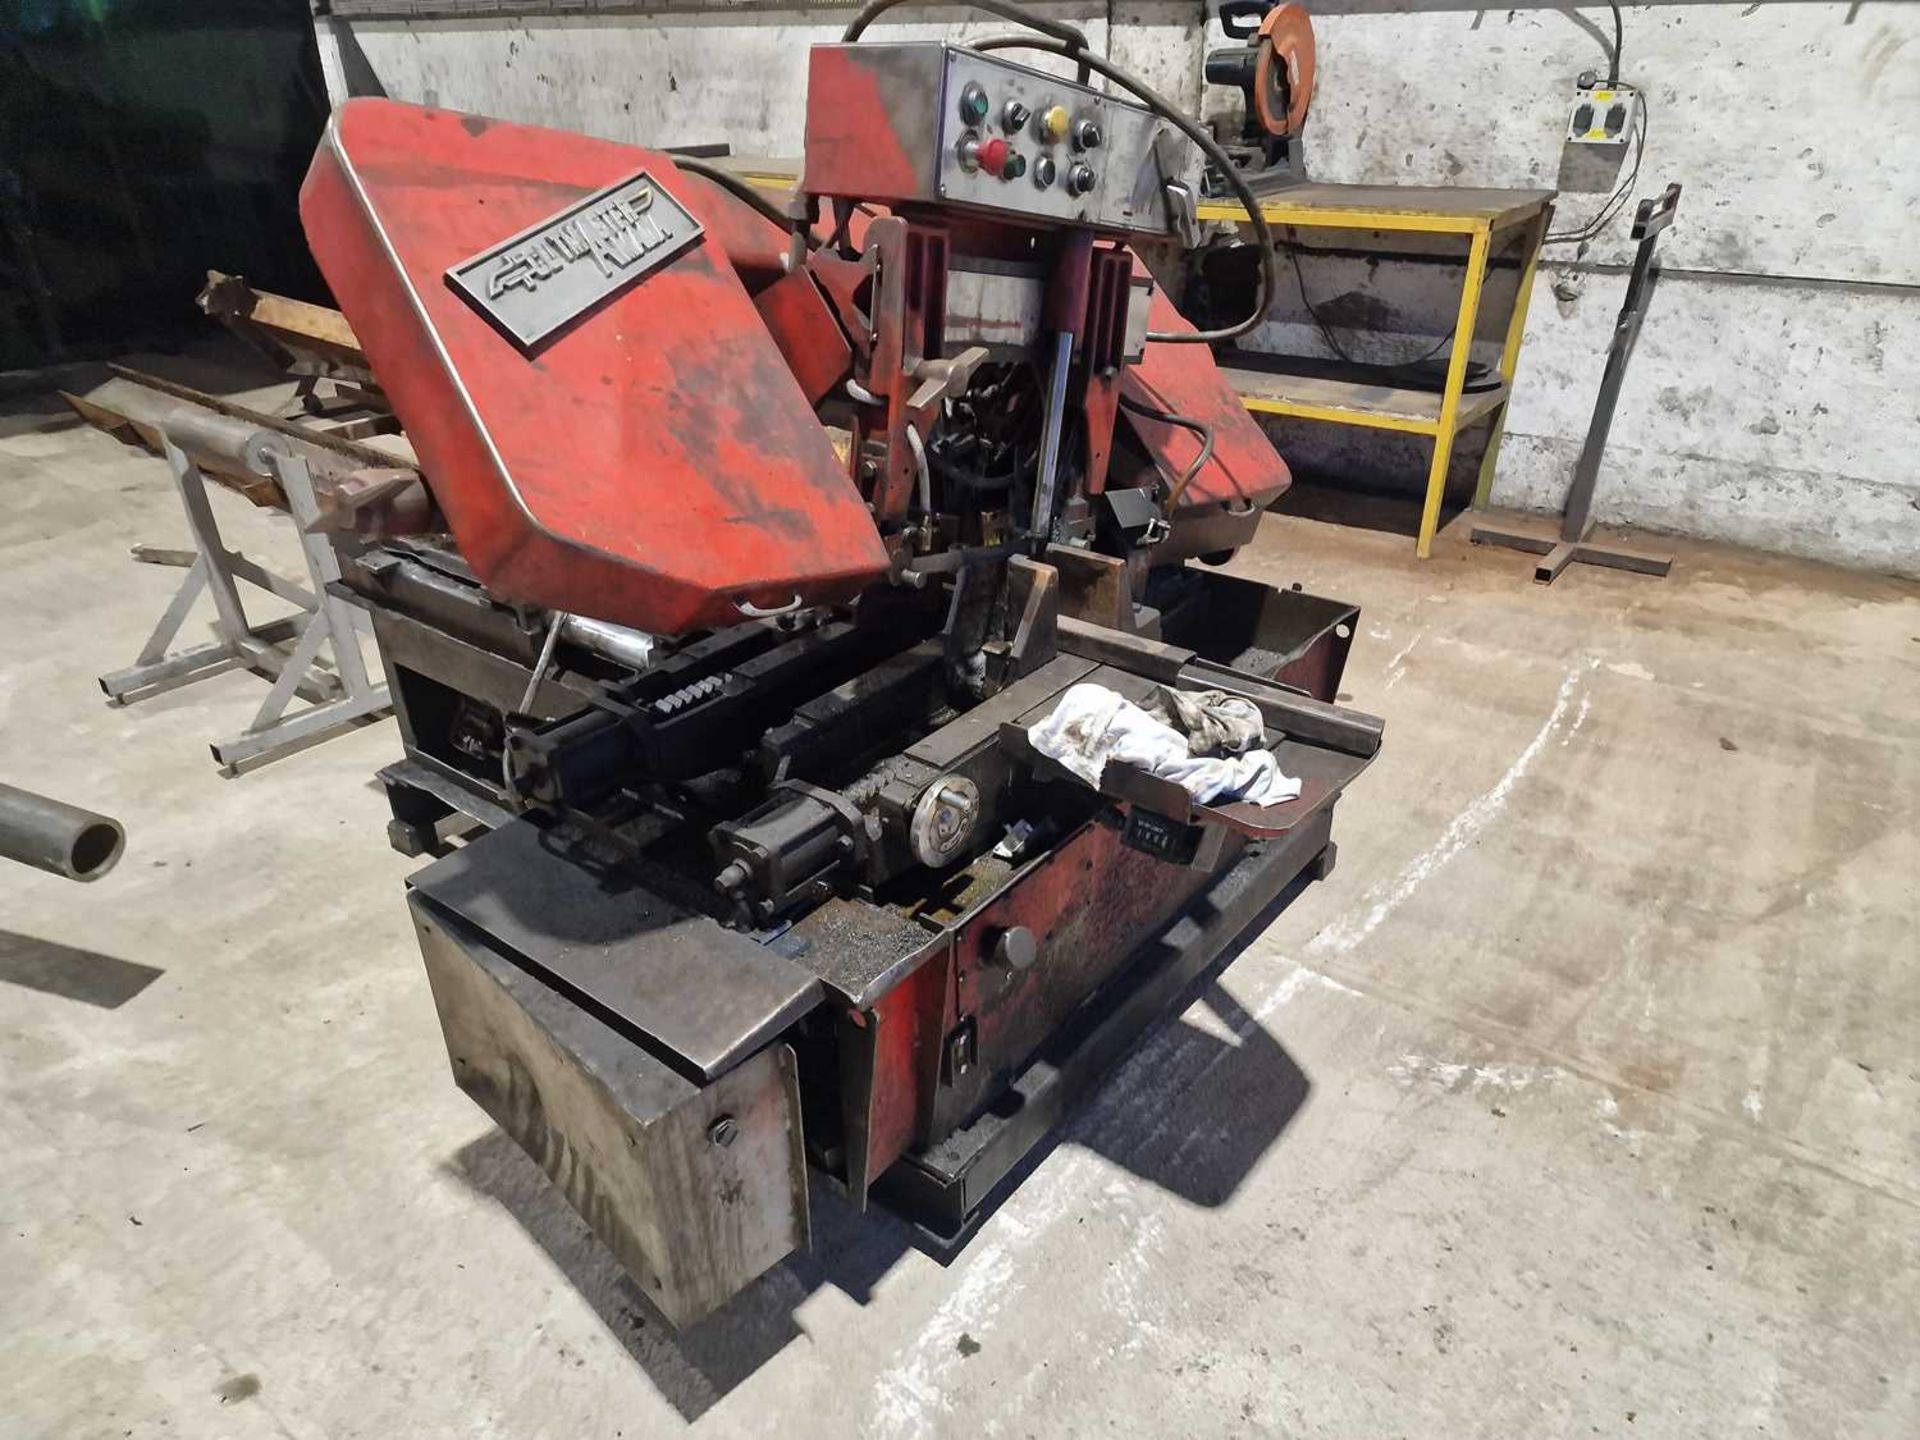 1989 Amada Cutmaster HA-250 415 Volt Band Saw (BEING SOLD FROM PICS)